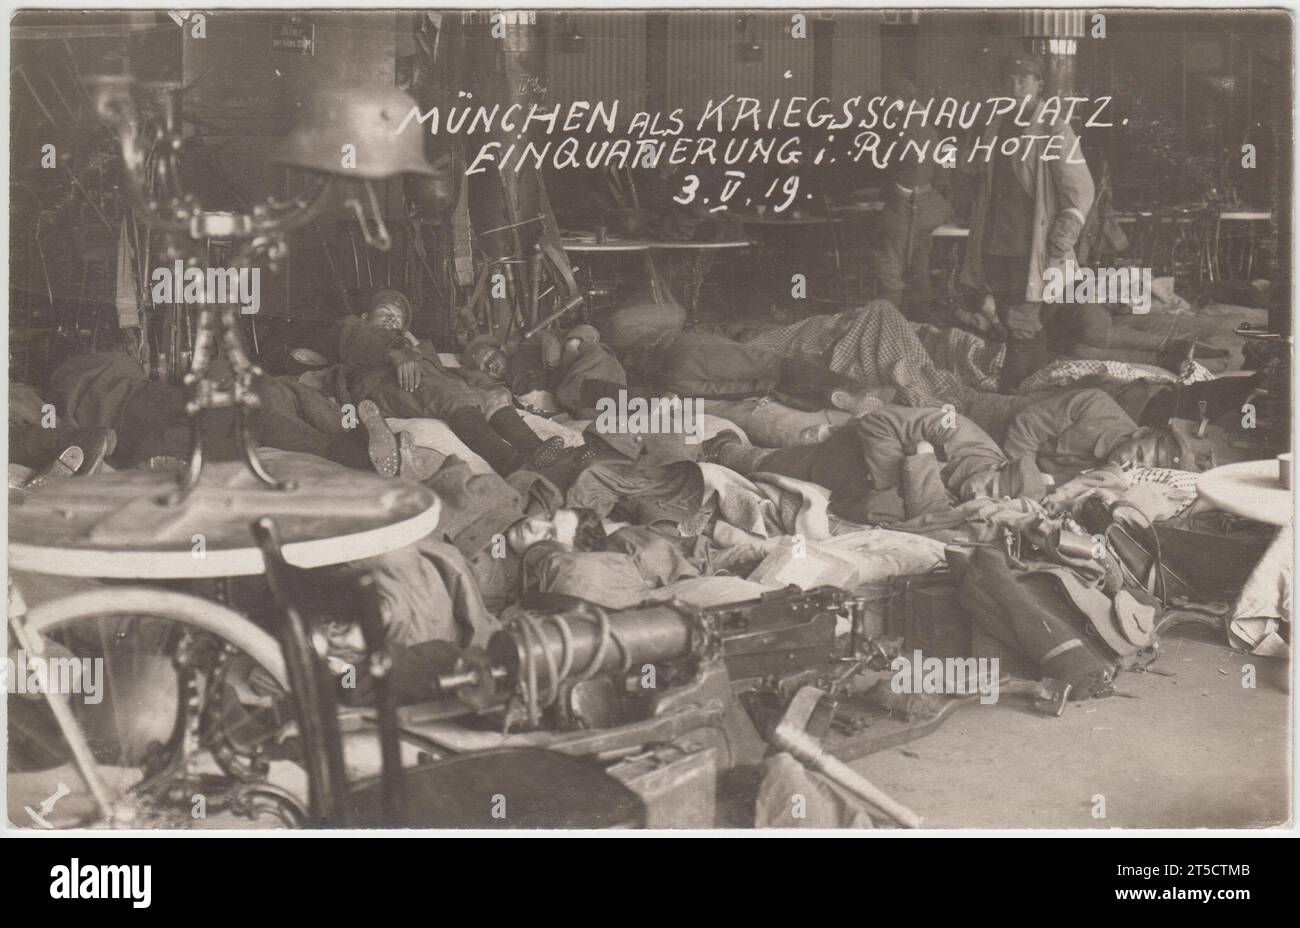 'München als Kriegsschauplatz. Einquartierung i Ring Hotel, 3.5.19' / 'Munich as a theatre of war. Accommodation in the Ring Hotel, 3.5.19': Members of the paramilitary Freikorps billeted in the dining room of a Munich hotel during the attack on the Bavarian Soviet Republic in May 1919. The men are sleeping on the floor and a machine gun can be seen in the foreground. A German helmet is balanced on a candelabra on a table. Stock Photo